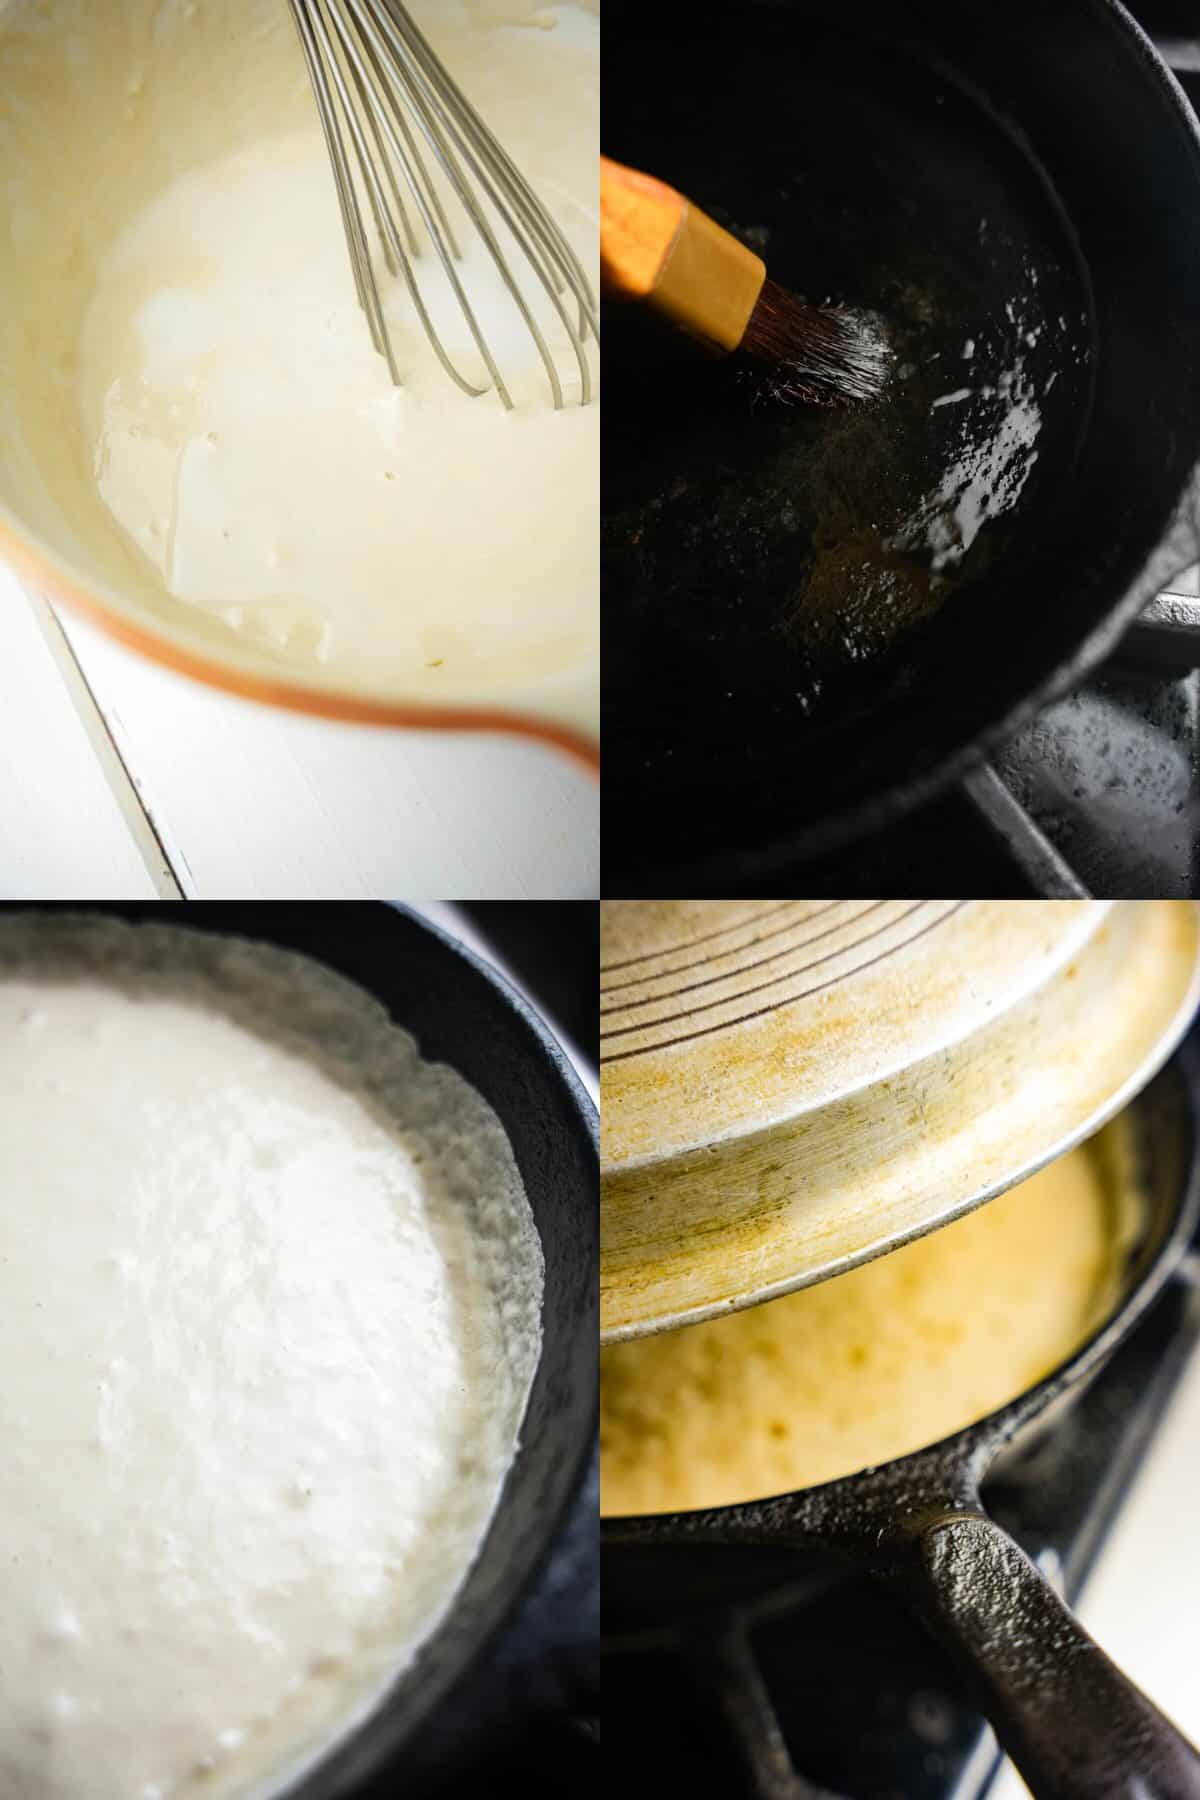 A series of photos showing the process of Wisking martabak batter, oiling a pan, and then cooking the pancakes covered.